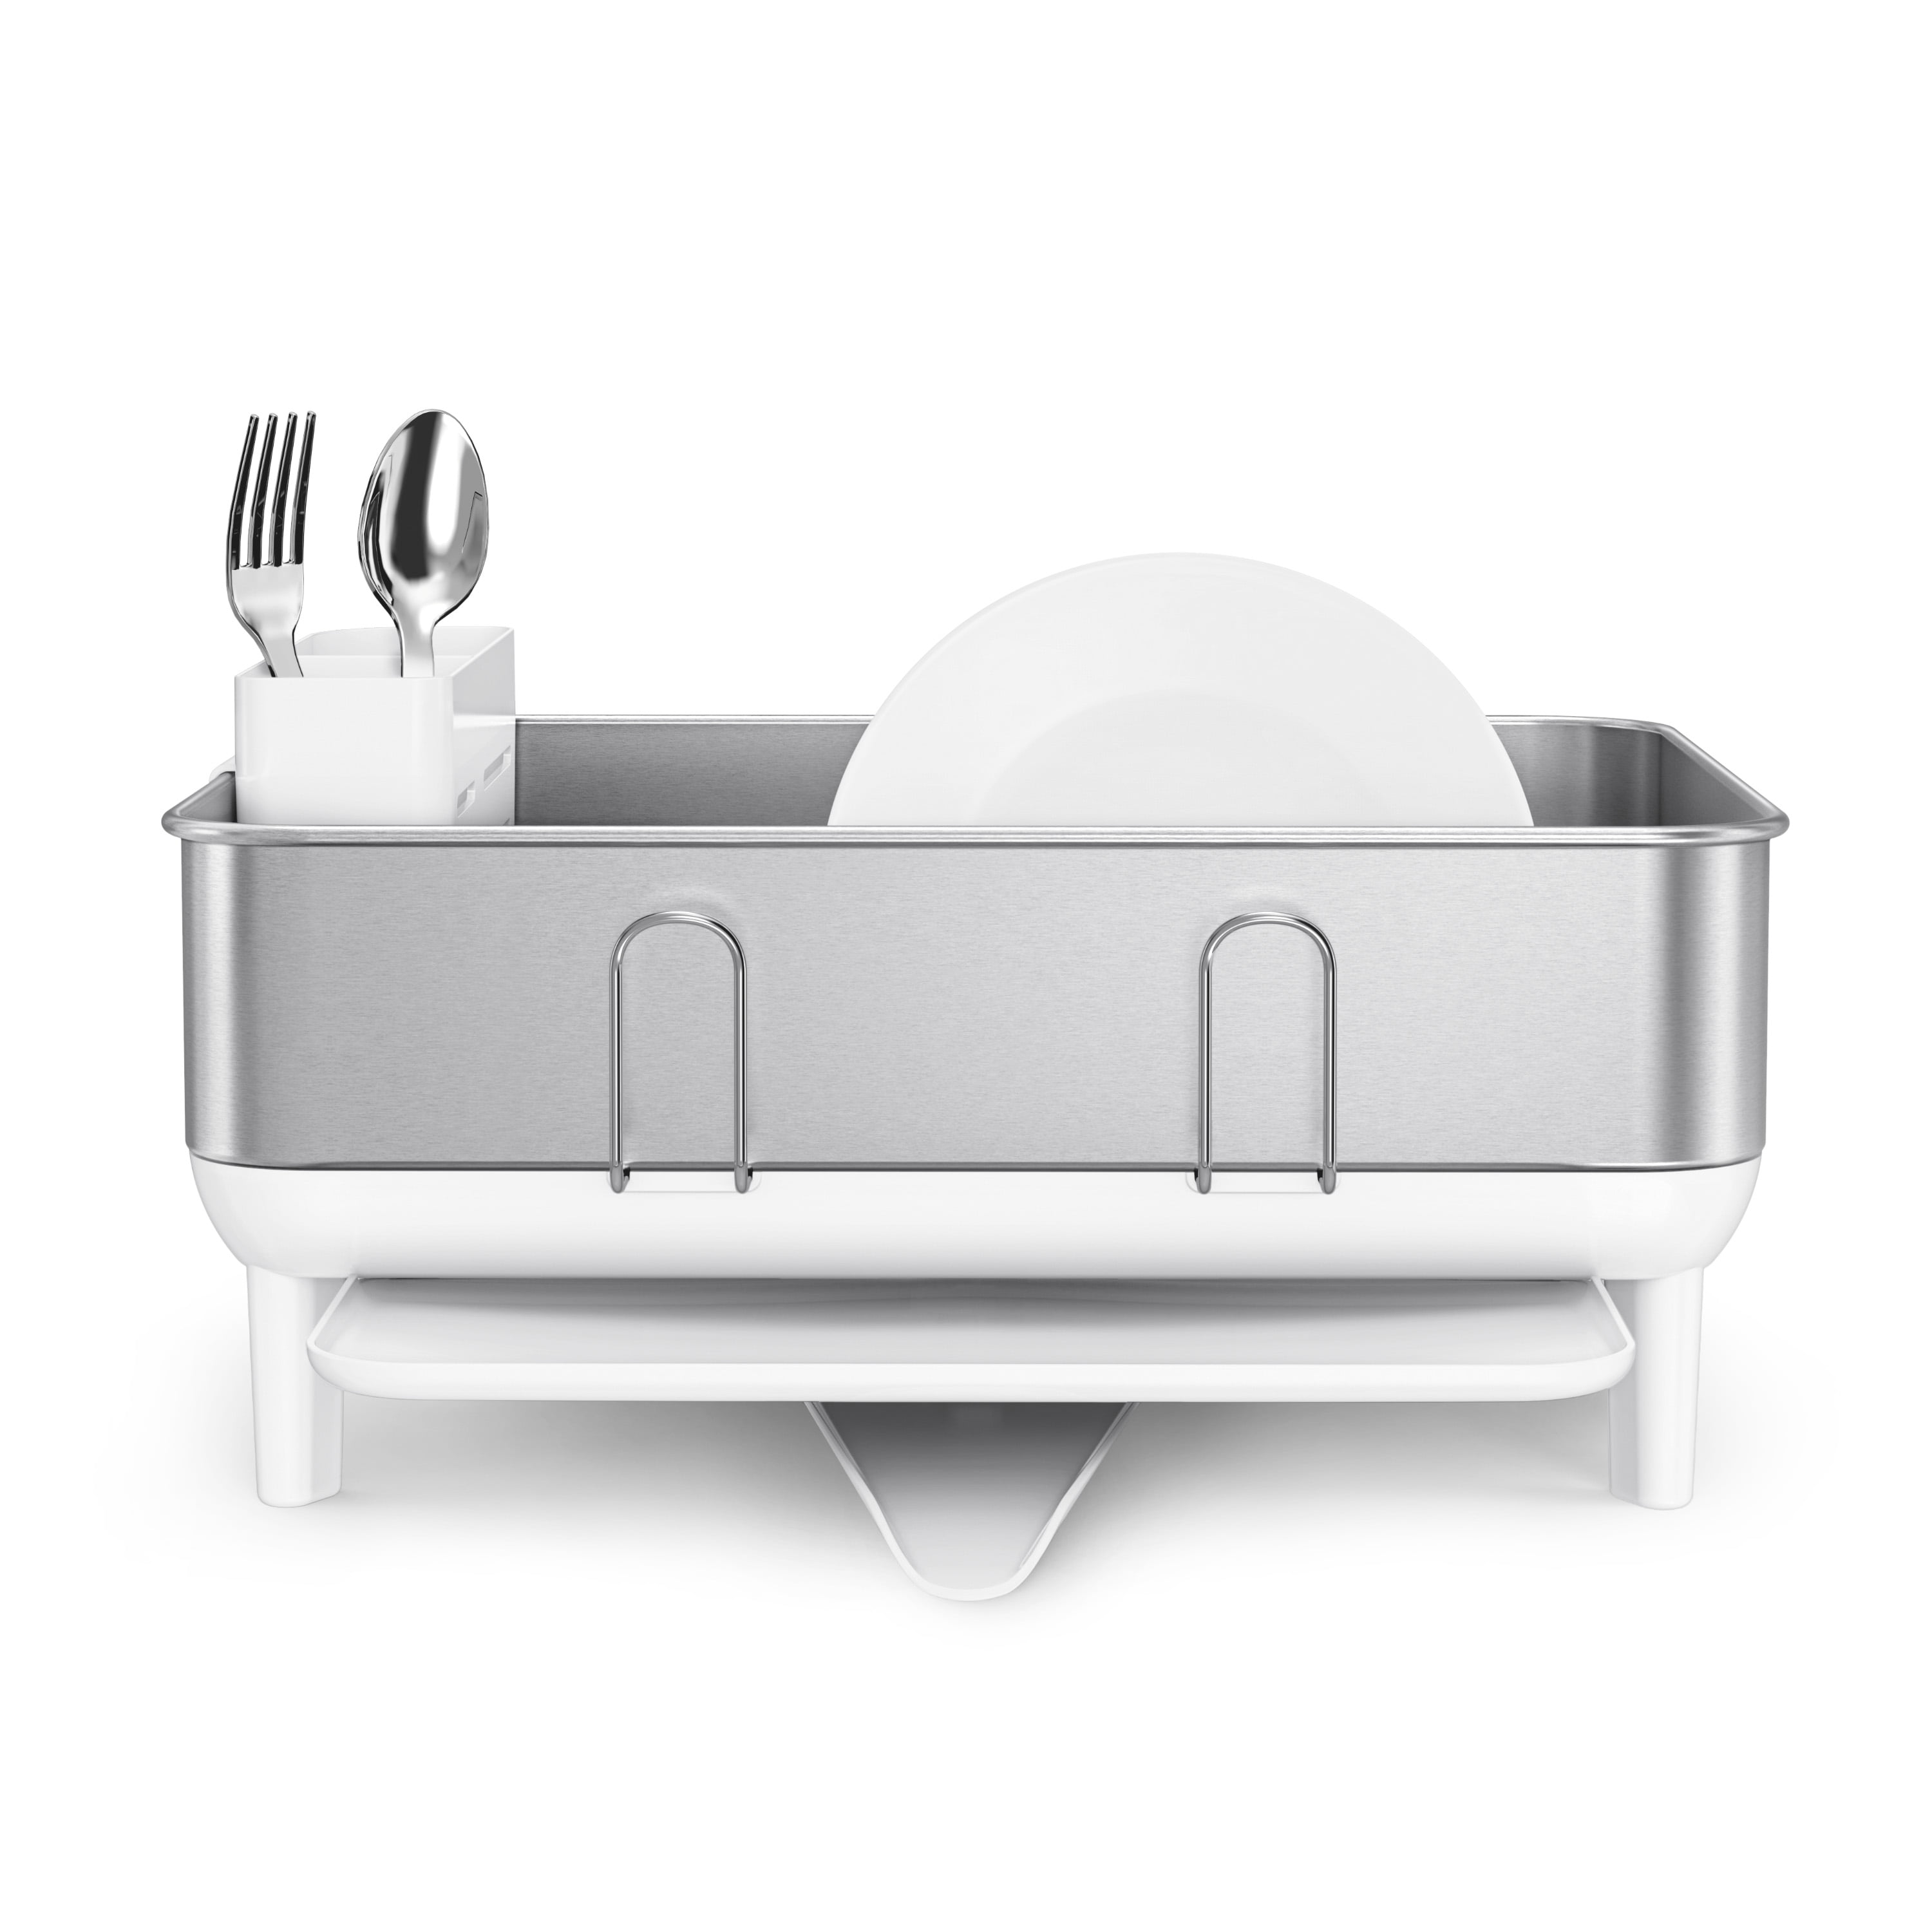  simplehuman Compact Kitchen Dish Drying Rack With Swivel  Spout, Fingerprint-Proof Stainless Steel Frame, Grey Plastic